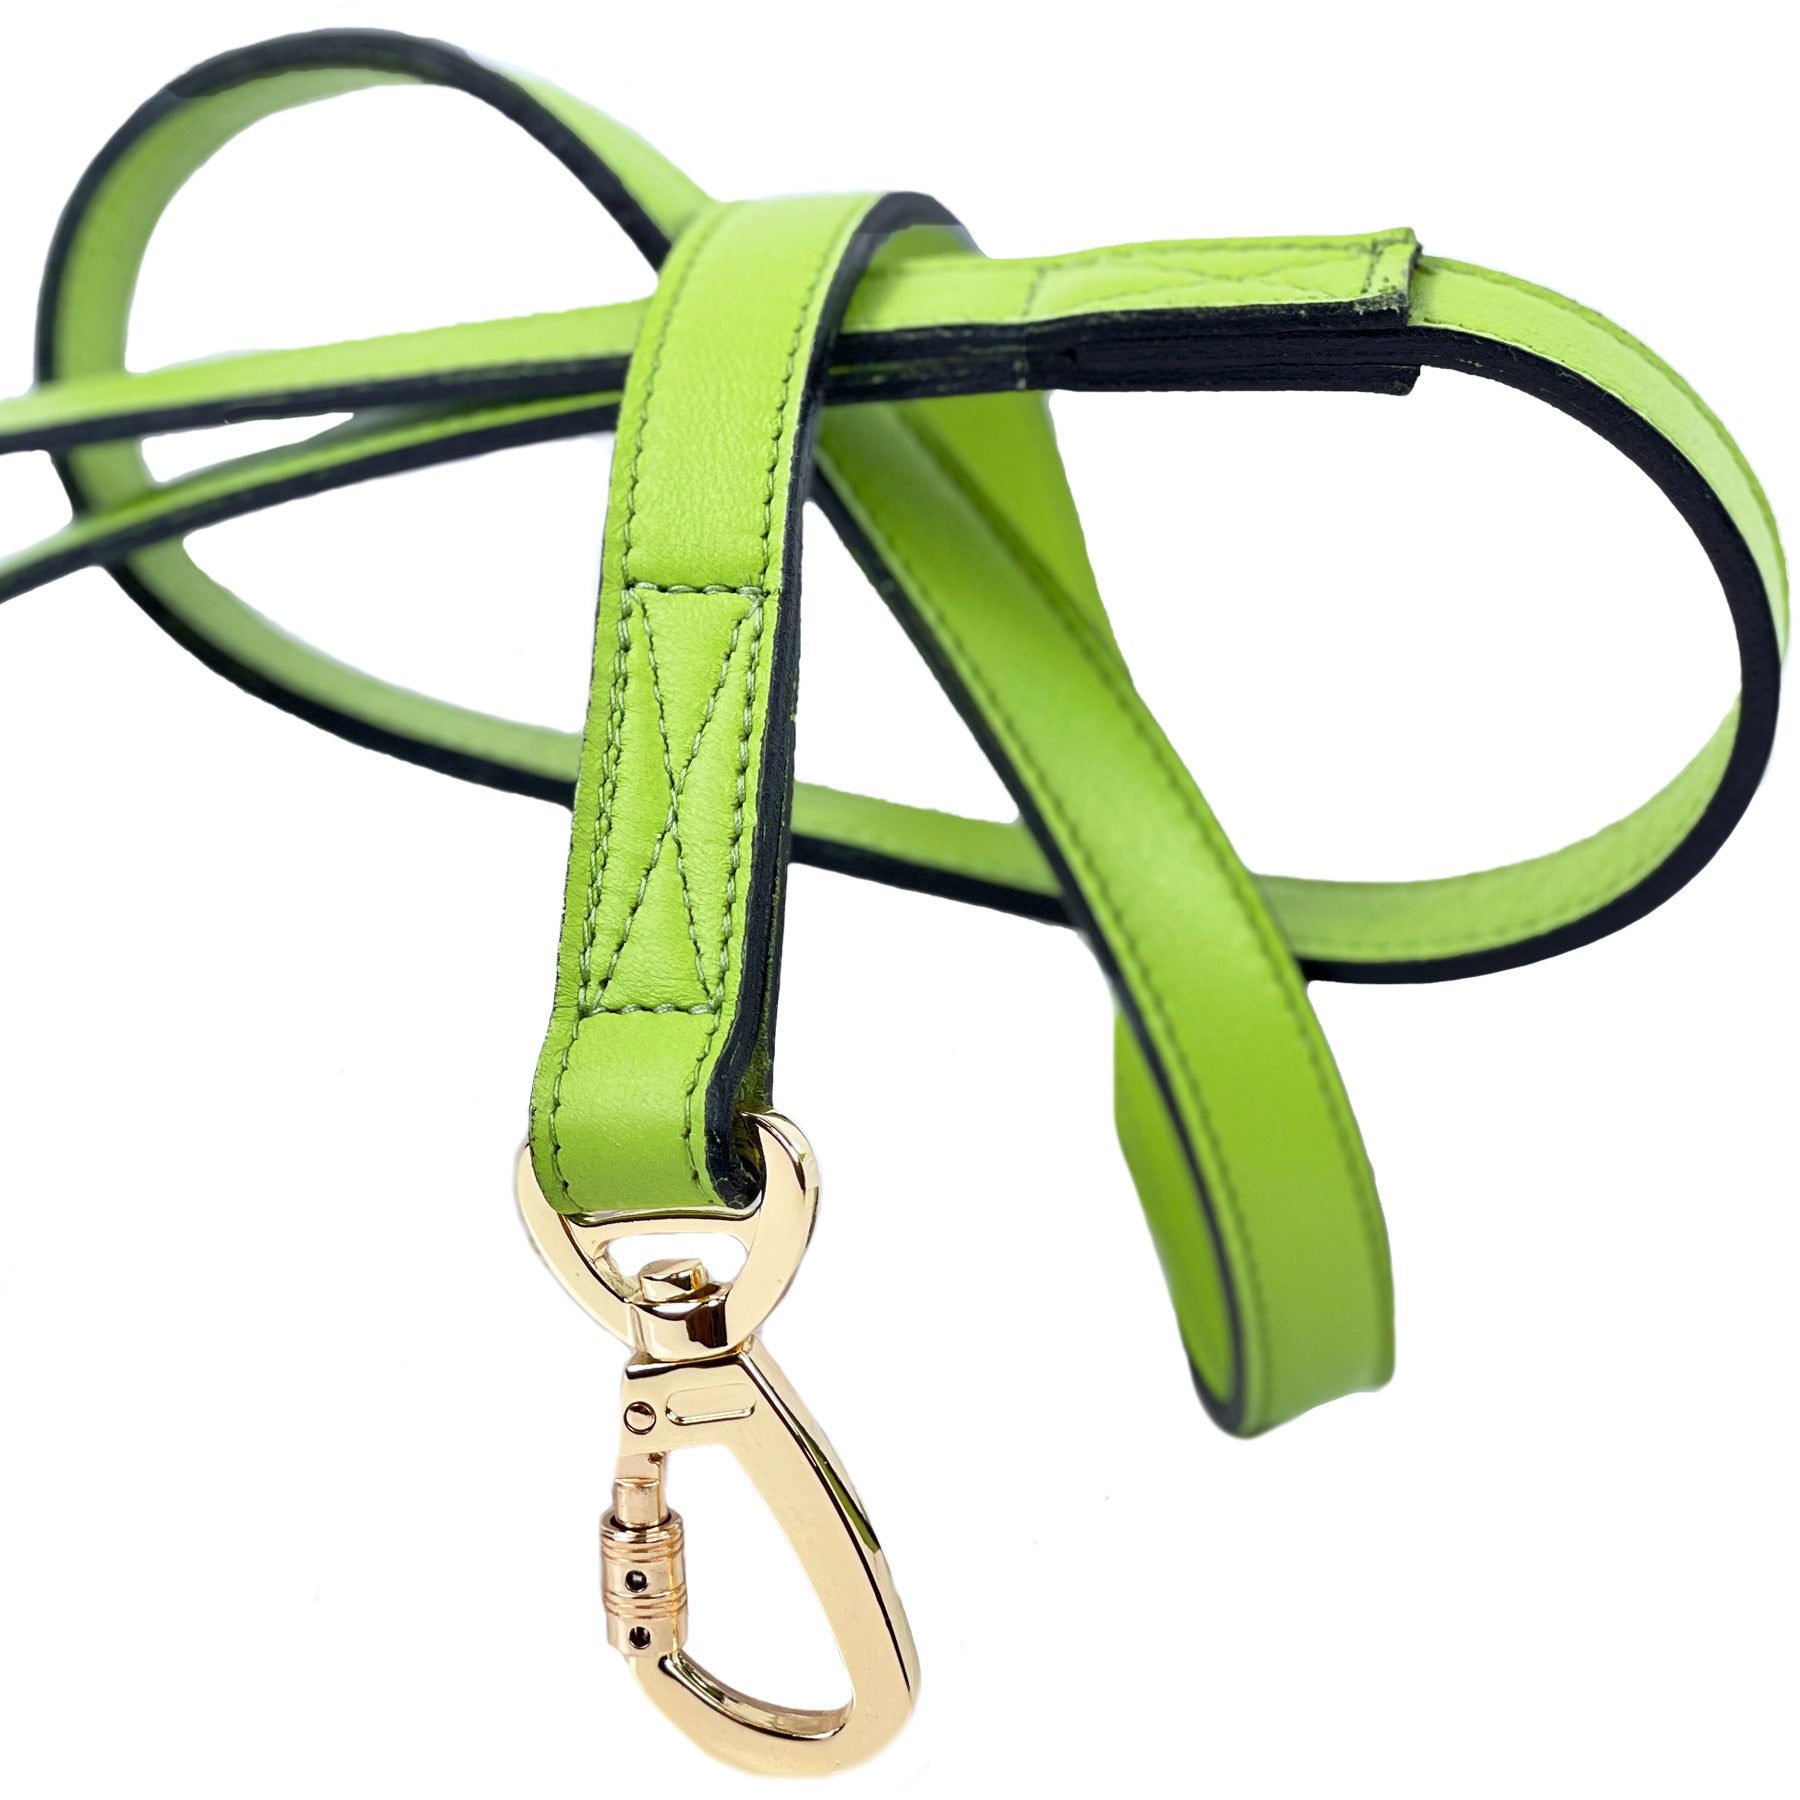 Signature Dog Leash in Lime Green & Gold